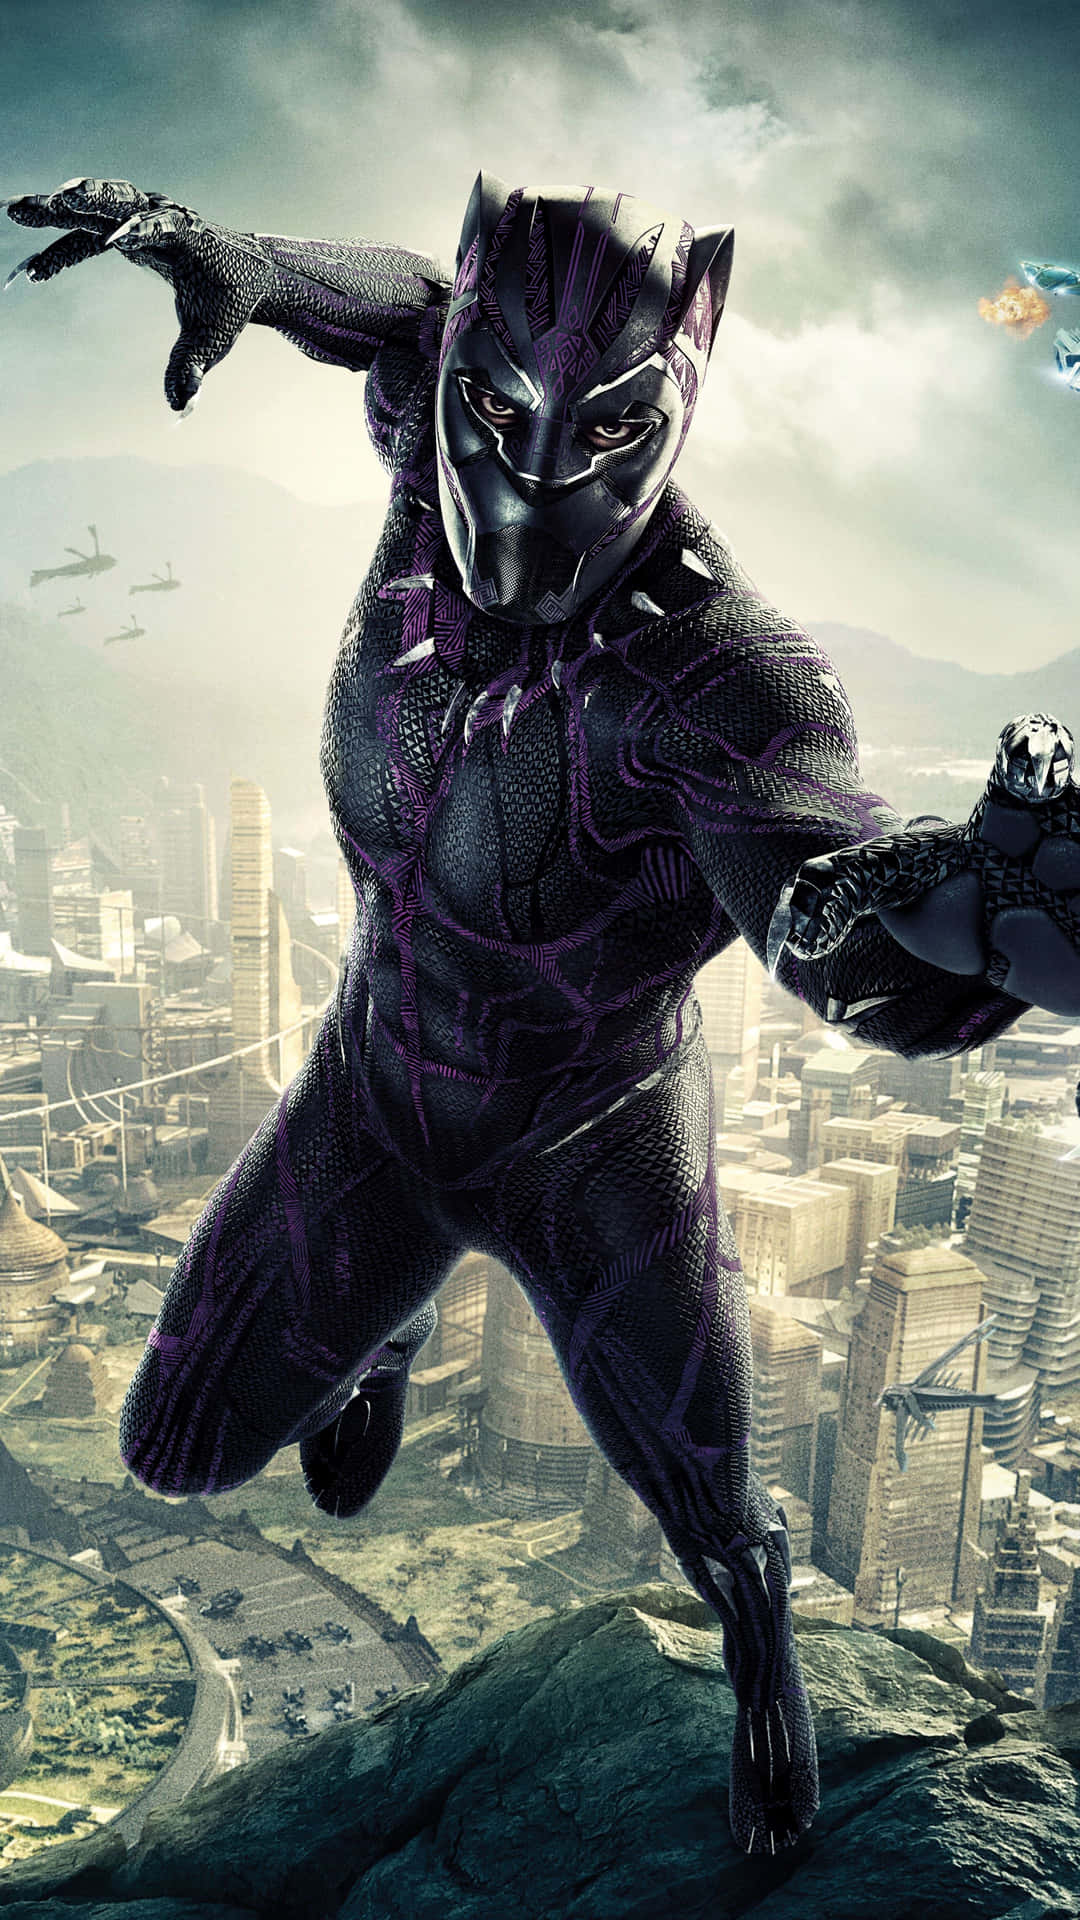 Get ready to experience the adventure of a lifetime with Black Panther.